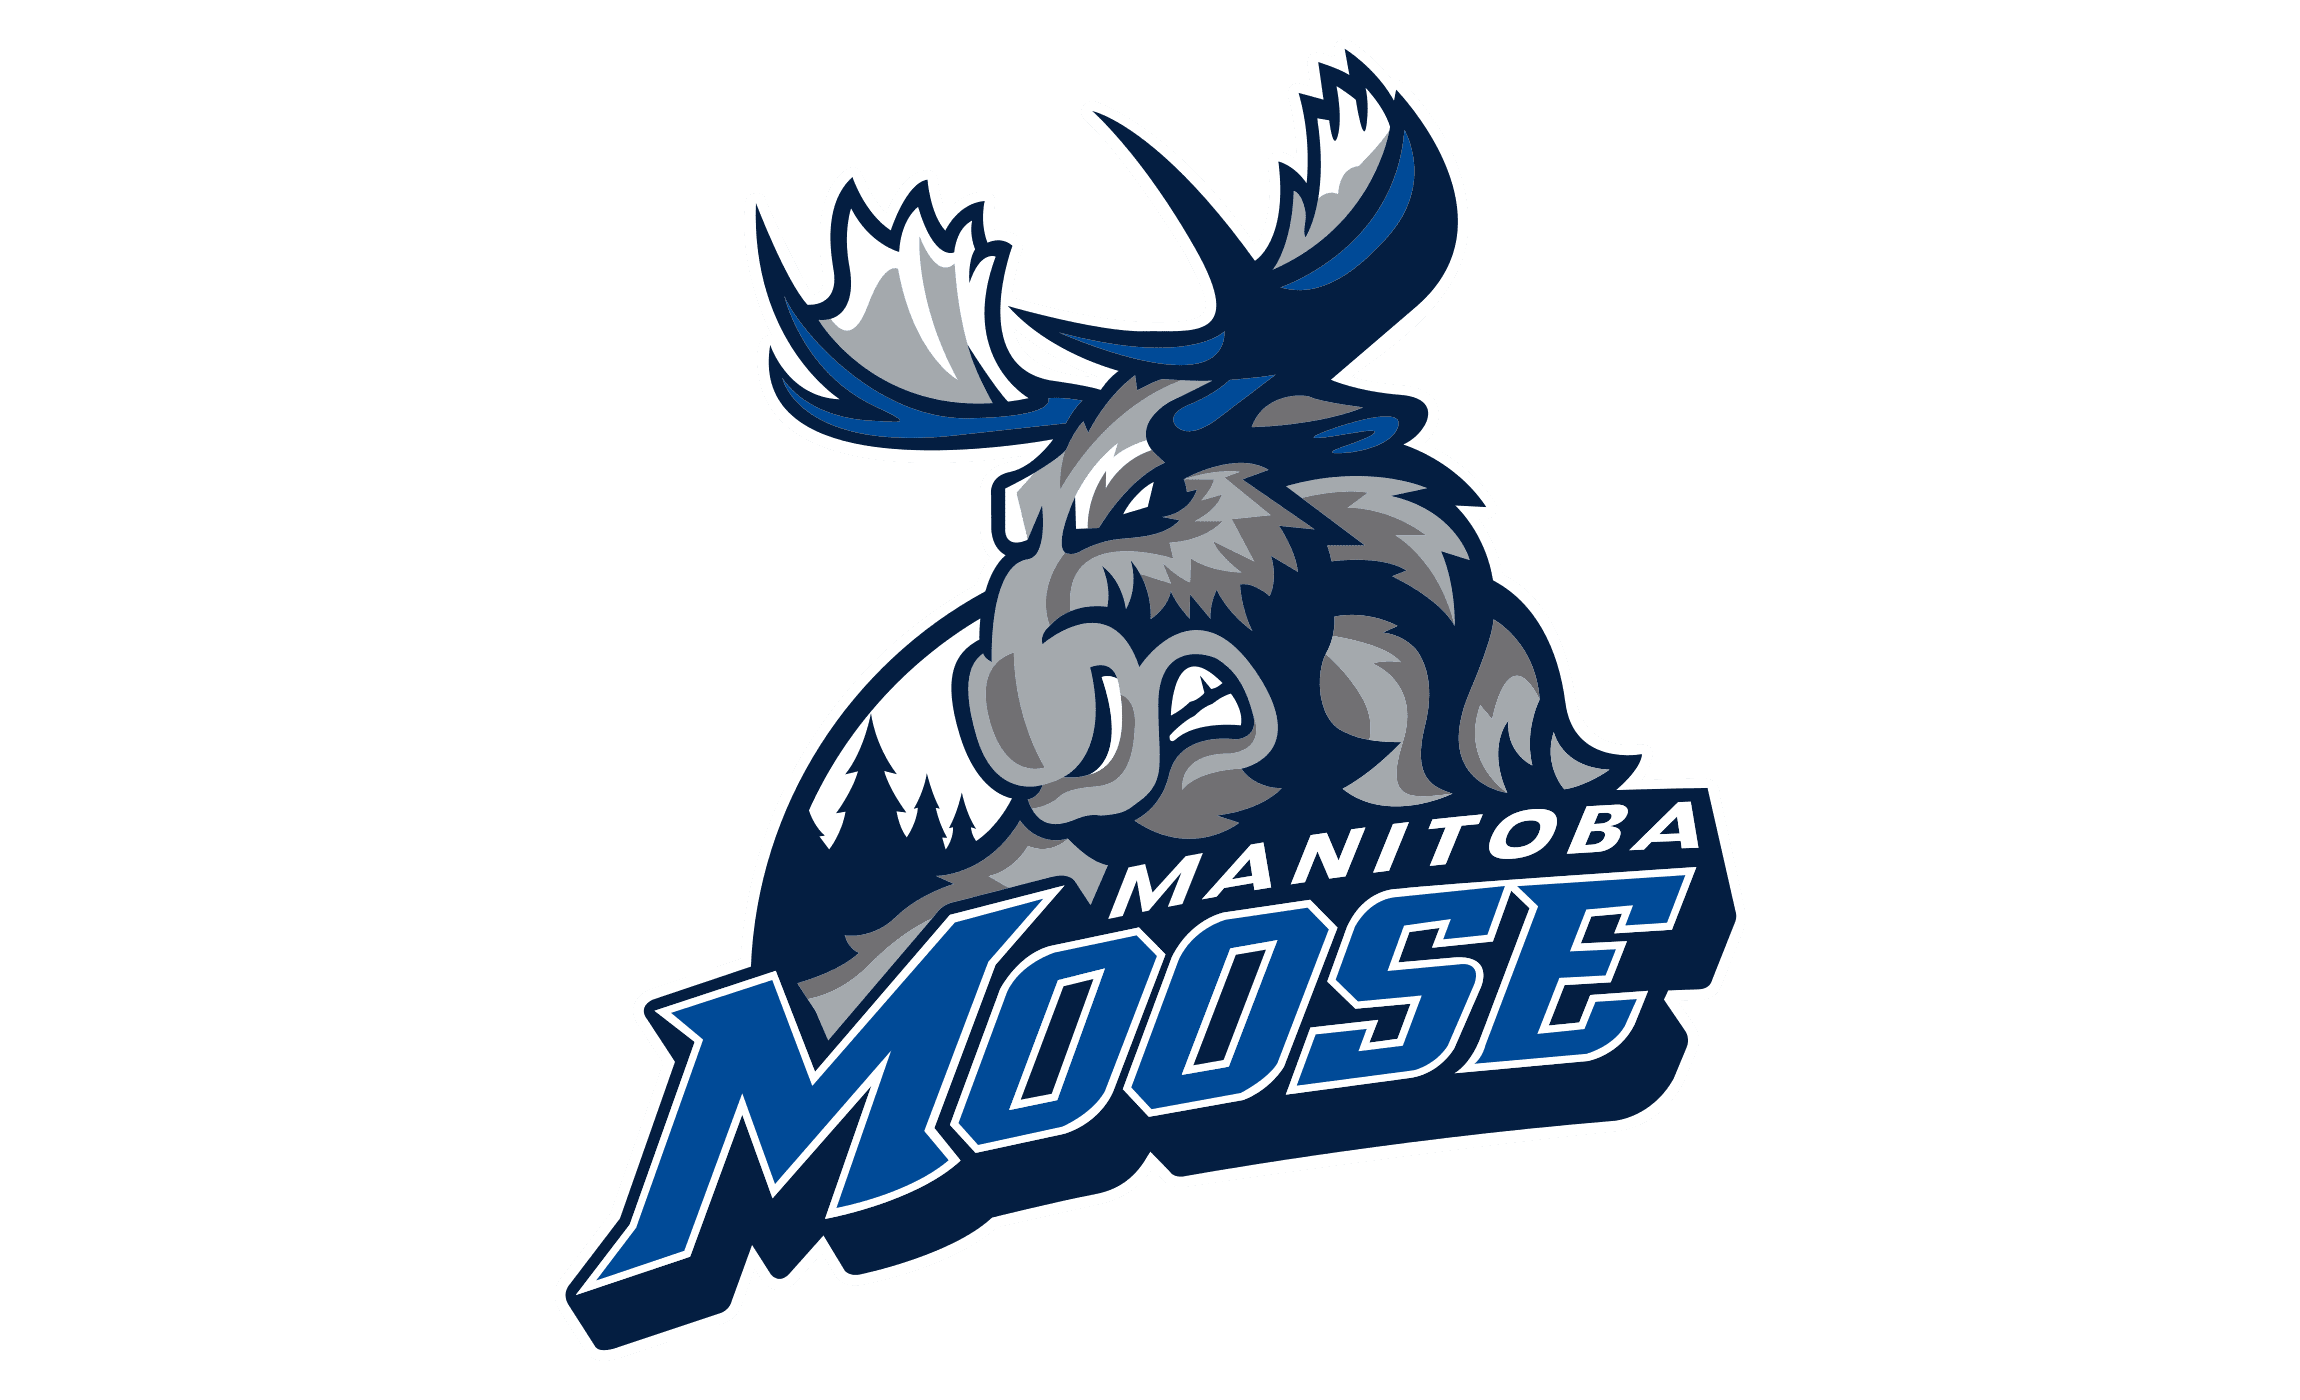 The Winnipeg Jets and Manitoba Moose will celebrate their fifth